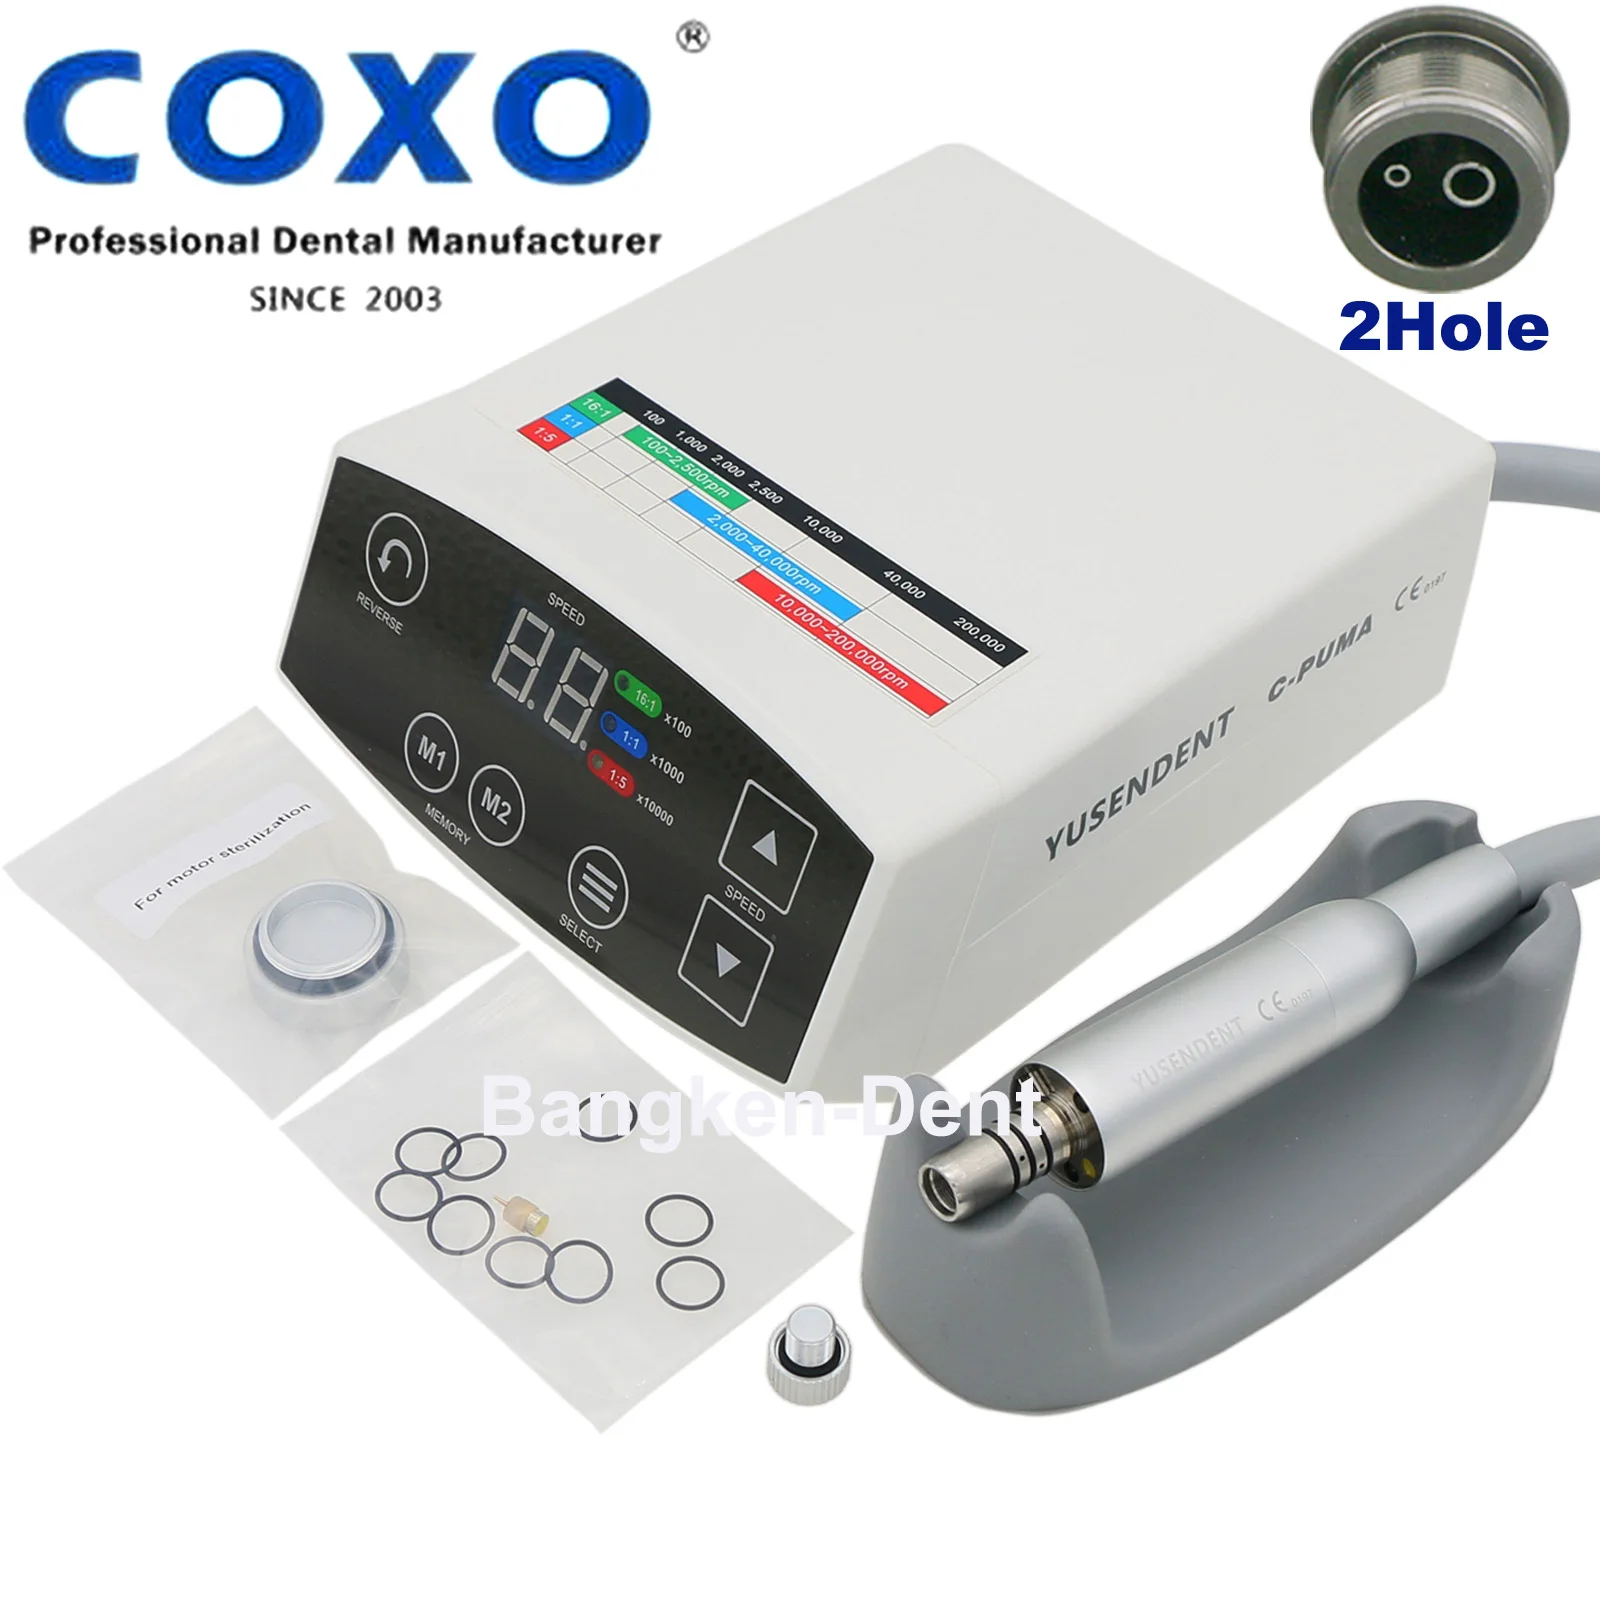 

COXO YUSENDENT Dental LED Brushless Electric Mini Micro Motor C PUMA 2Hole Fit 1:1 1:5 Contra Angle Inner Water Handpiece